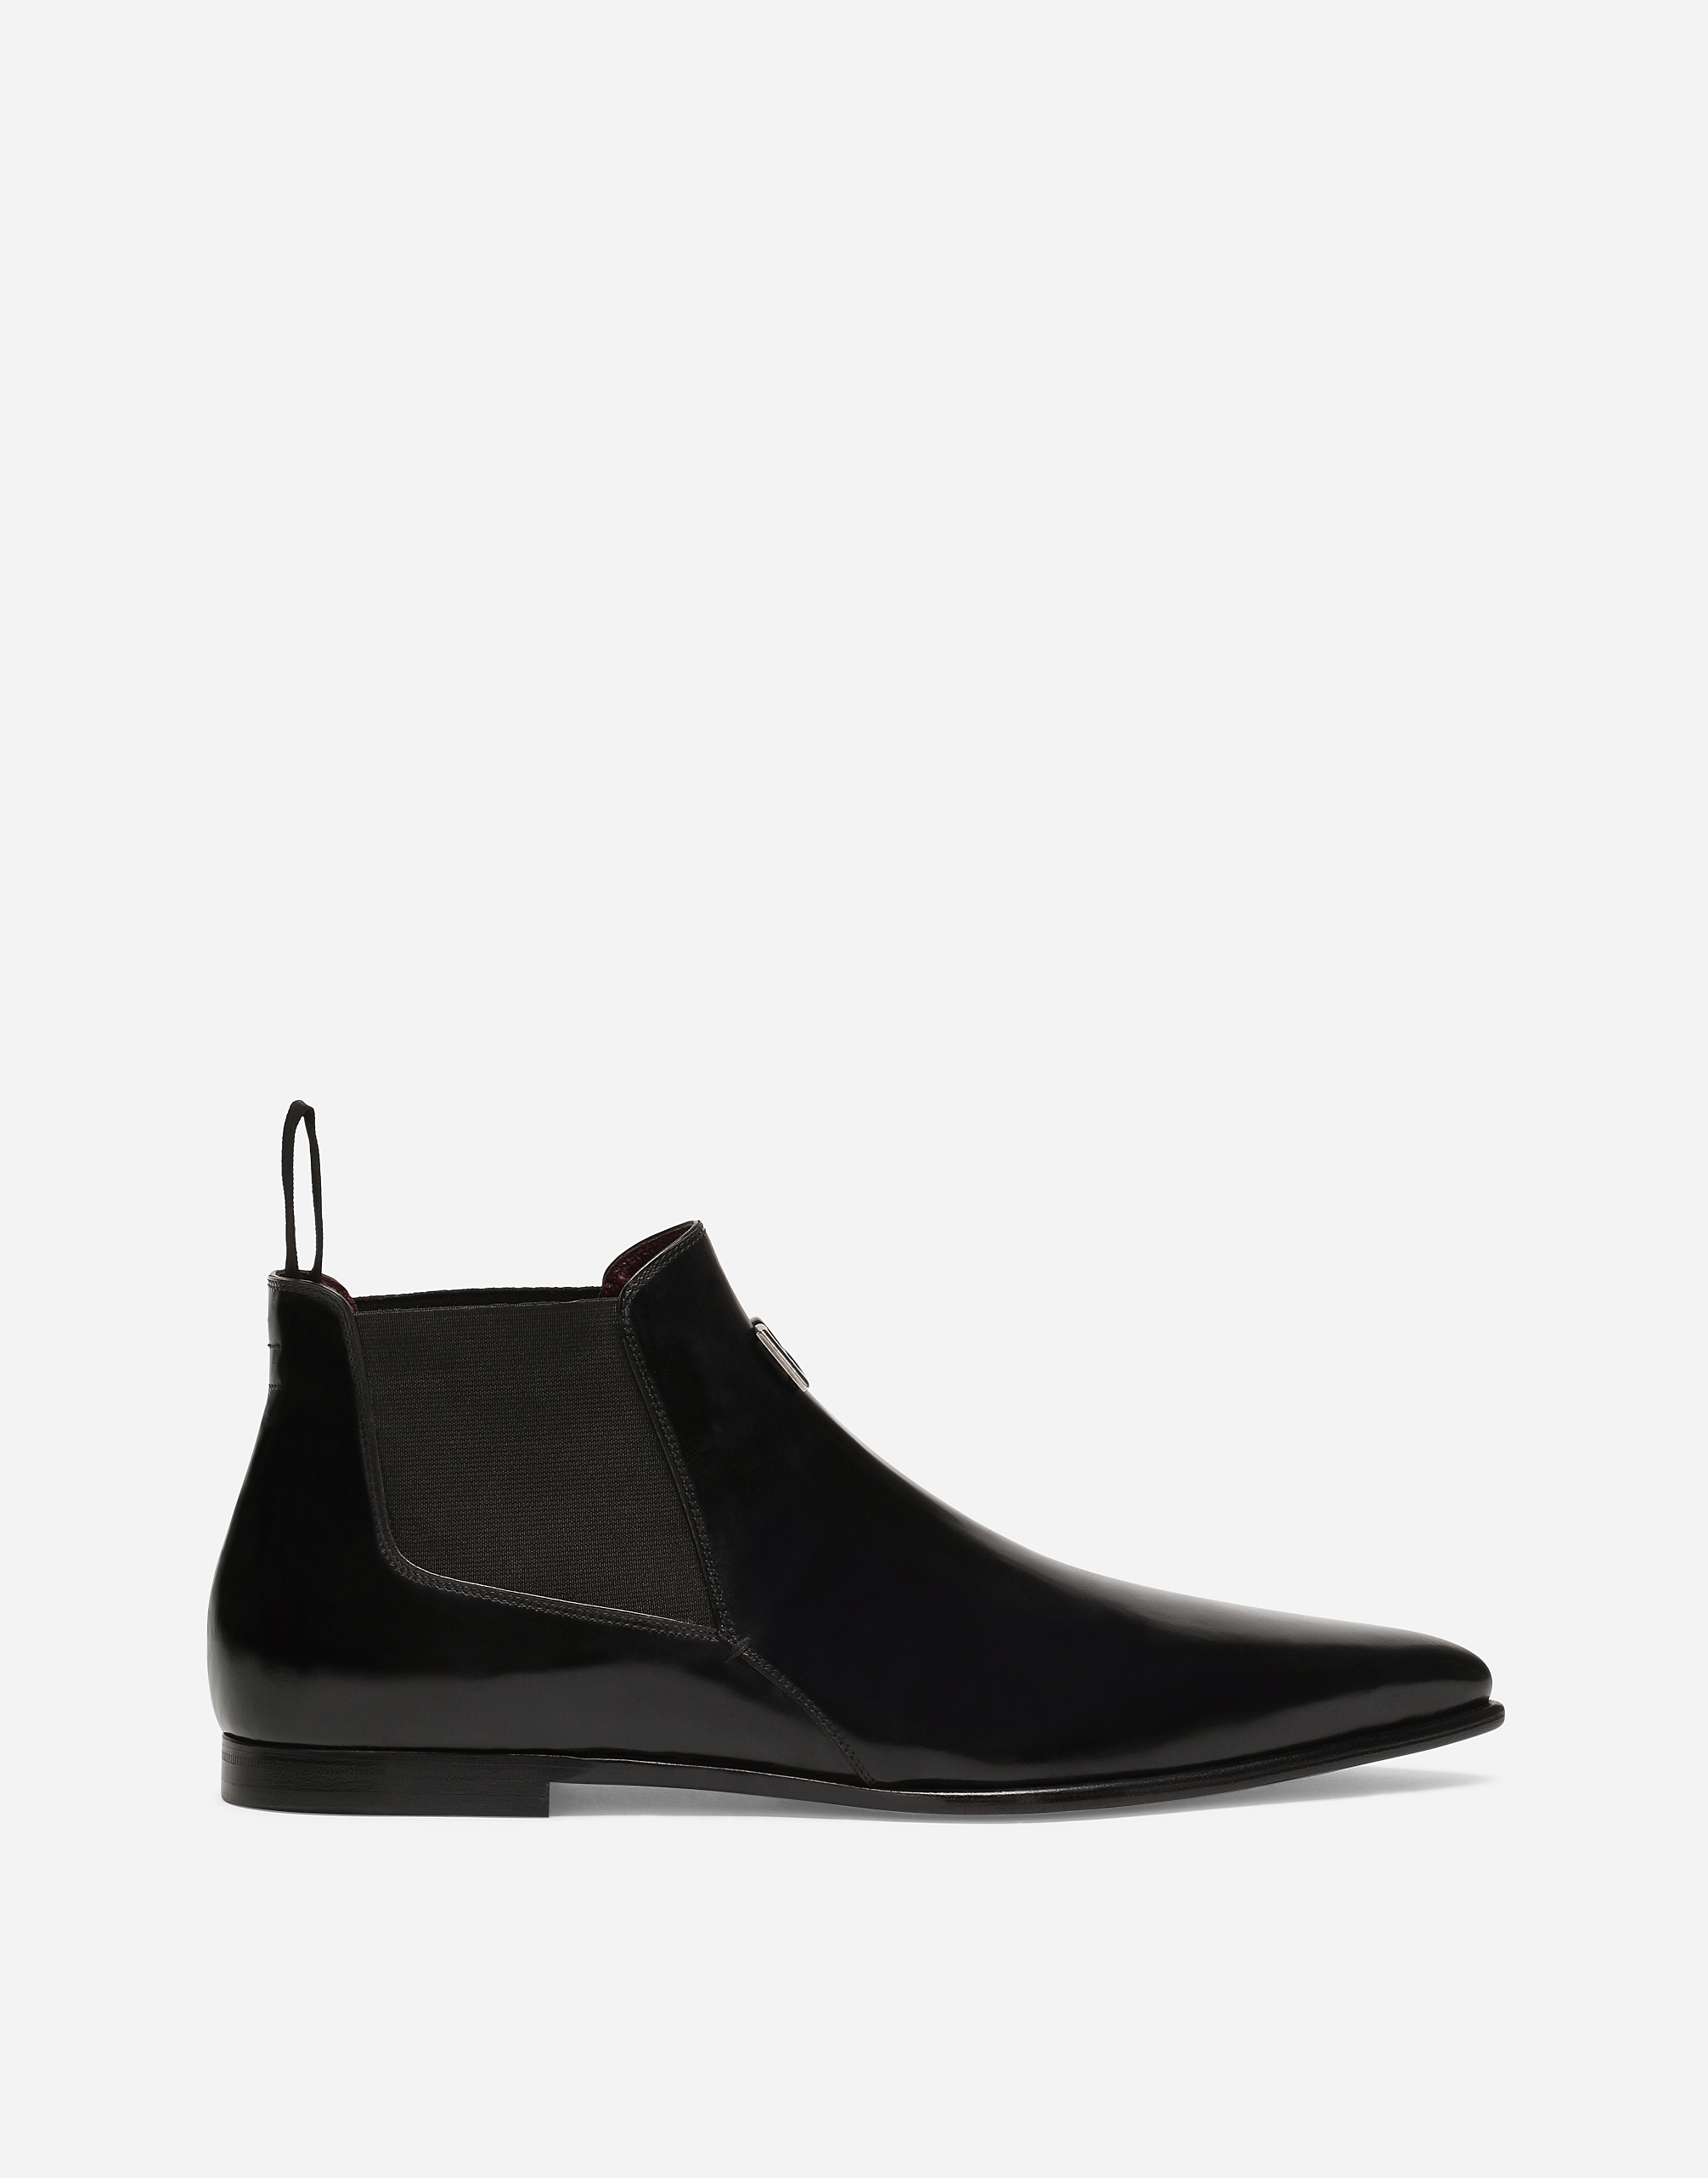 Brushed calfskin nappa Achille ankle boots in Black